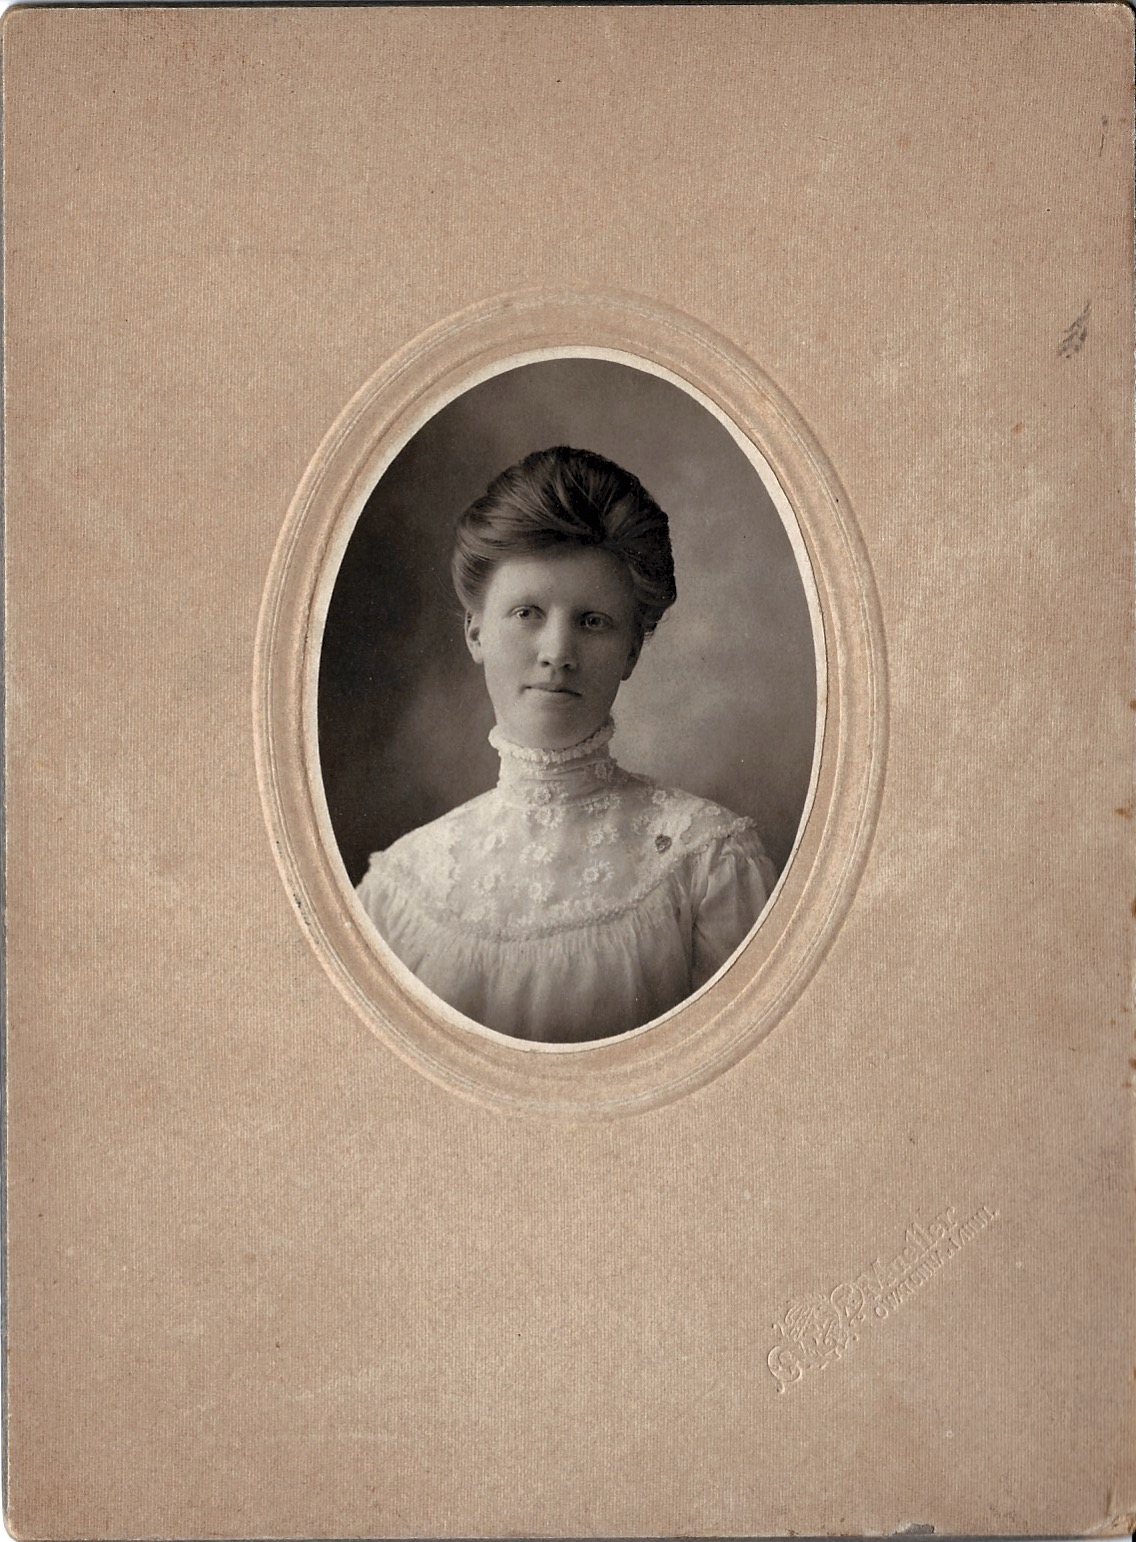 My great-great-grandmother Clara Peterson in 1904. Clara died of after affects from the Spanish Flu twenty years after this photo was taken.